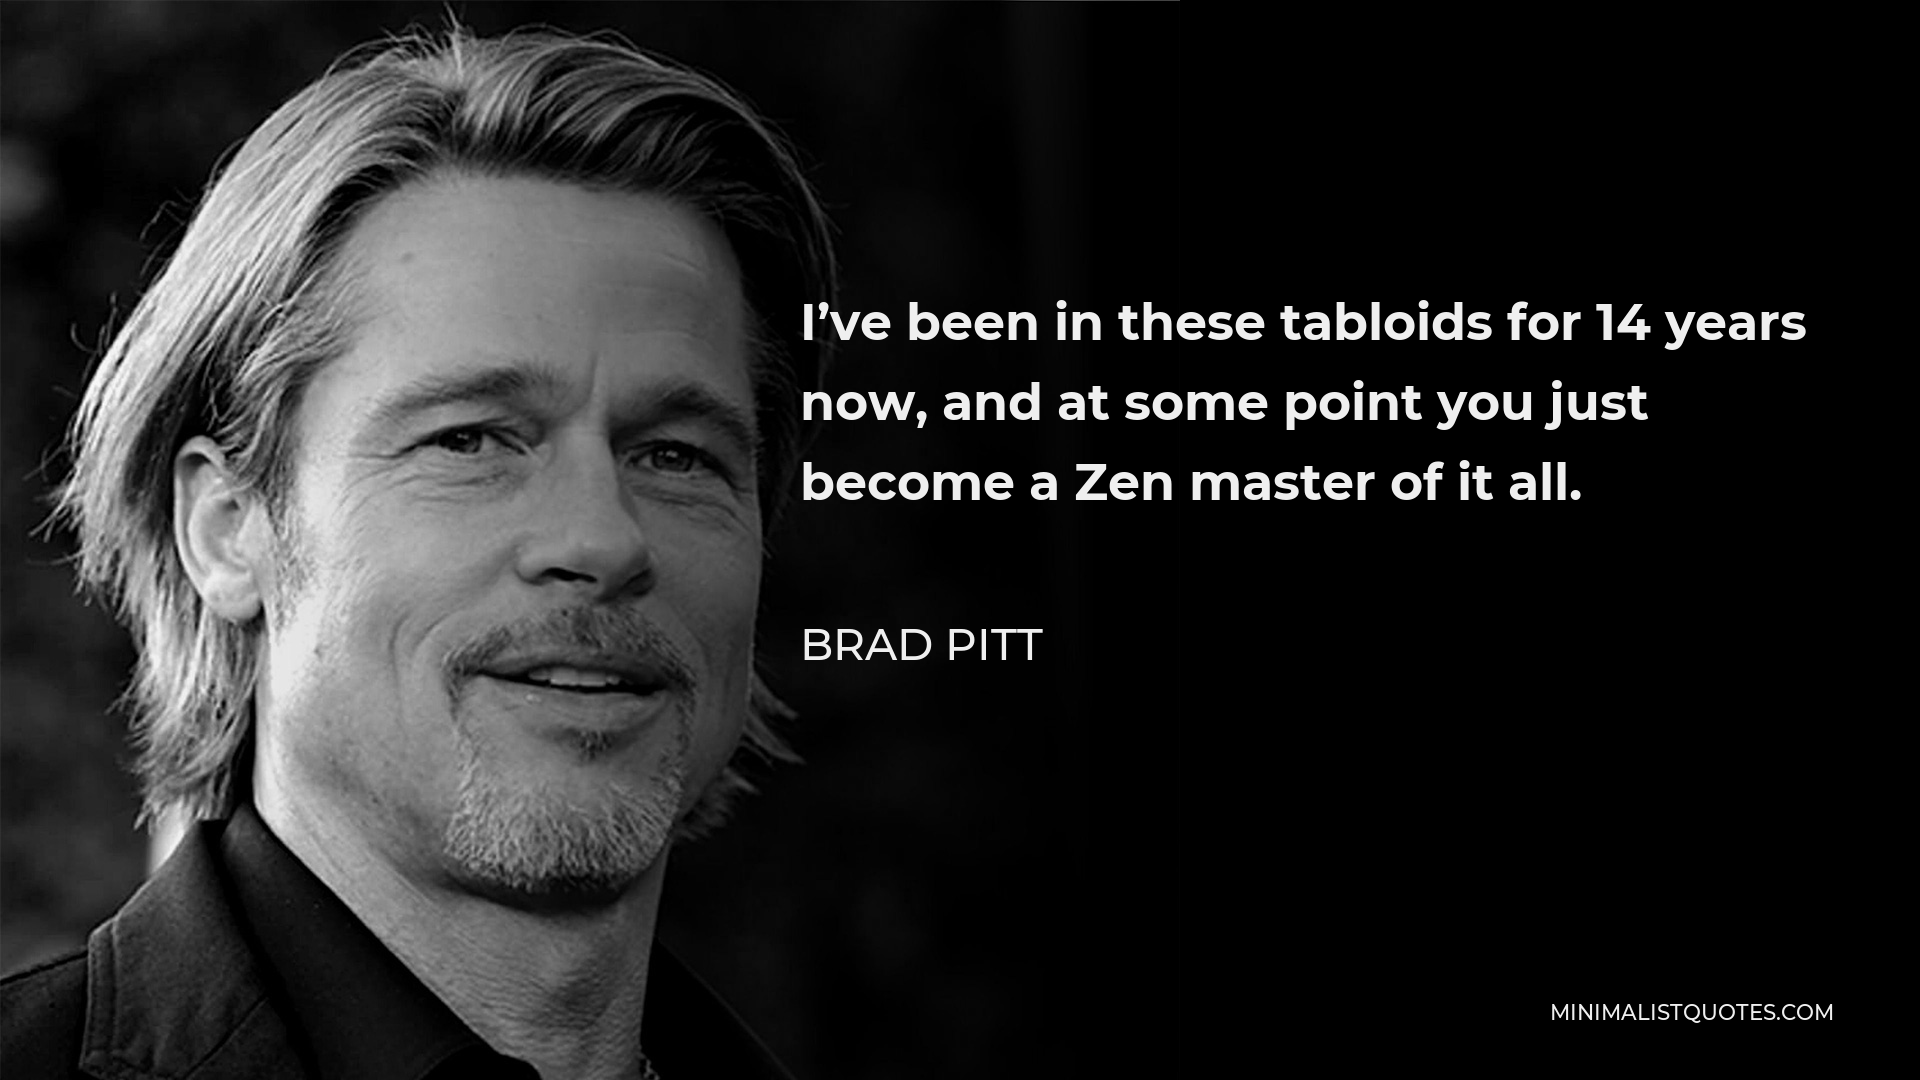 Brad Pitt Quote - I’ve been in these tabloids for 14 years now, and at some point you just become a Zen master of it all.